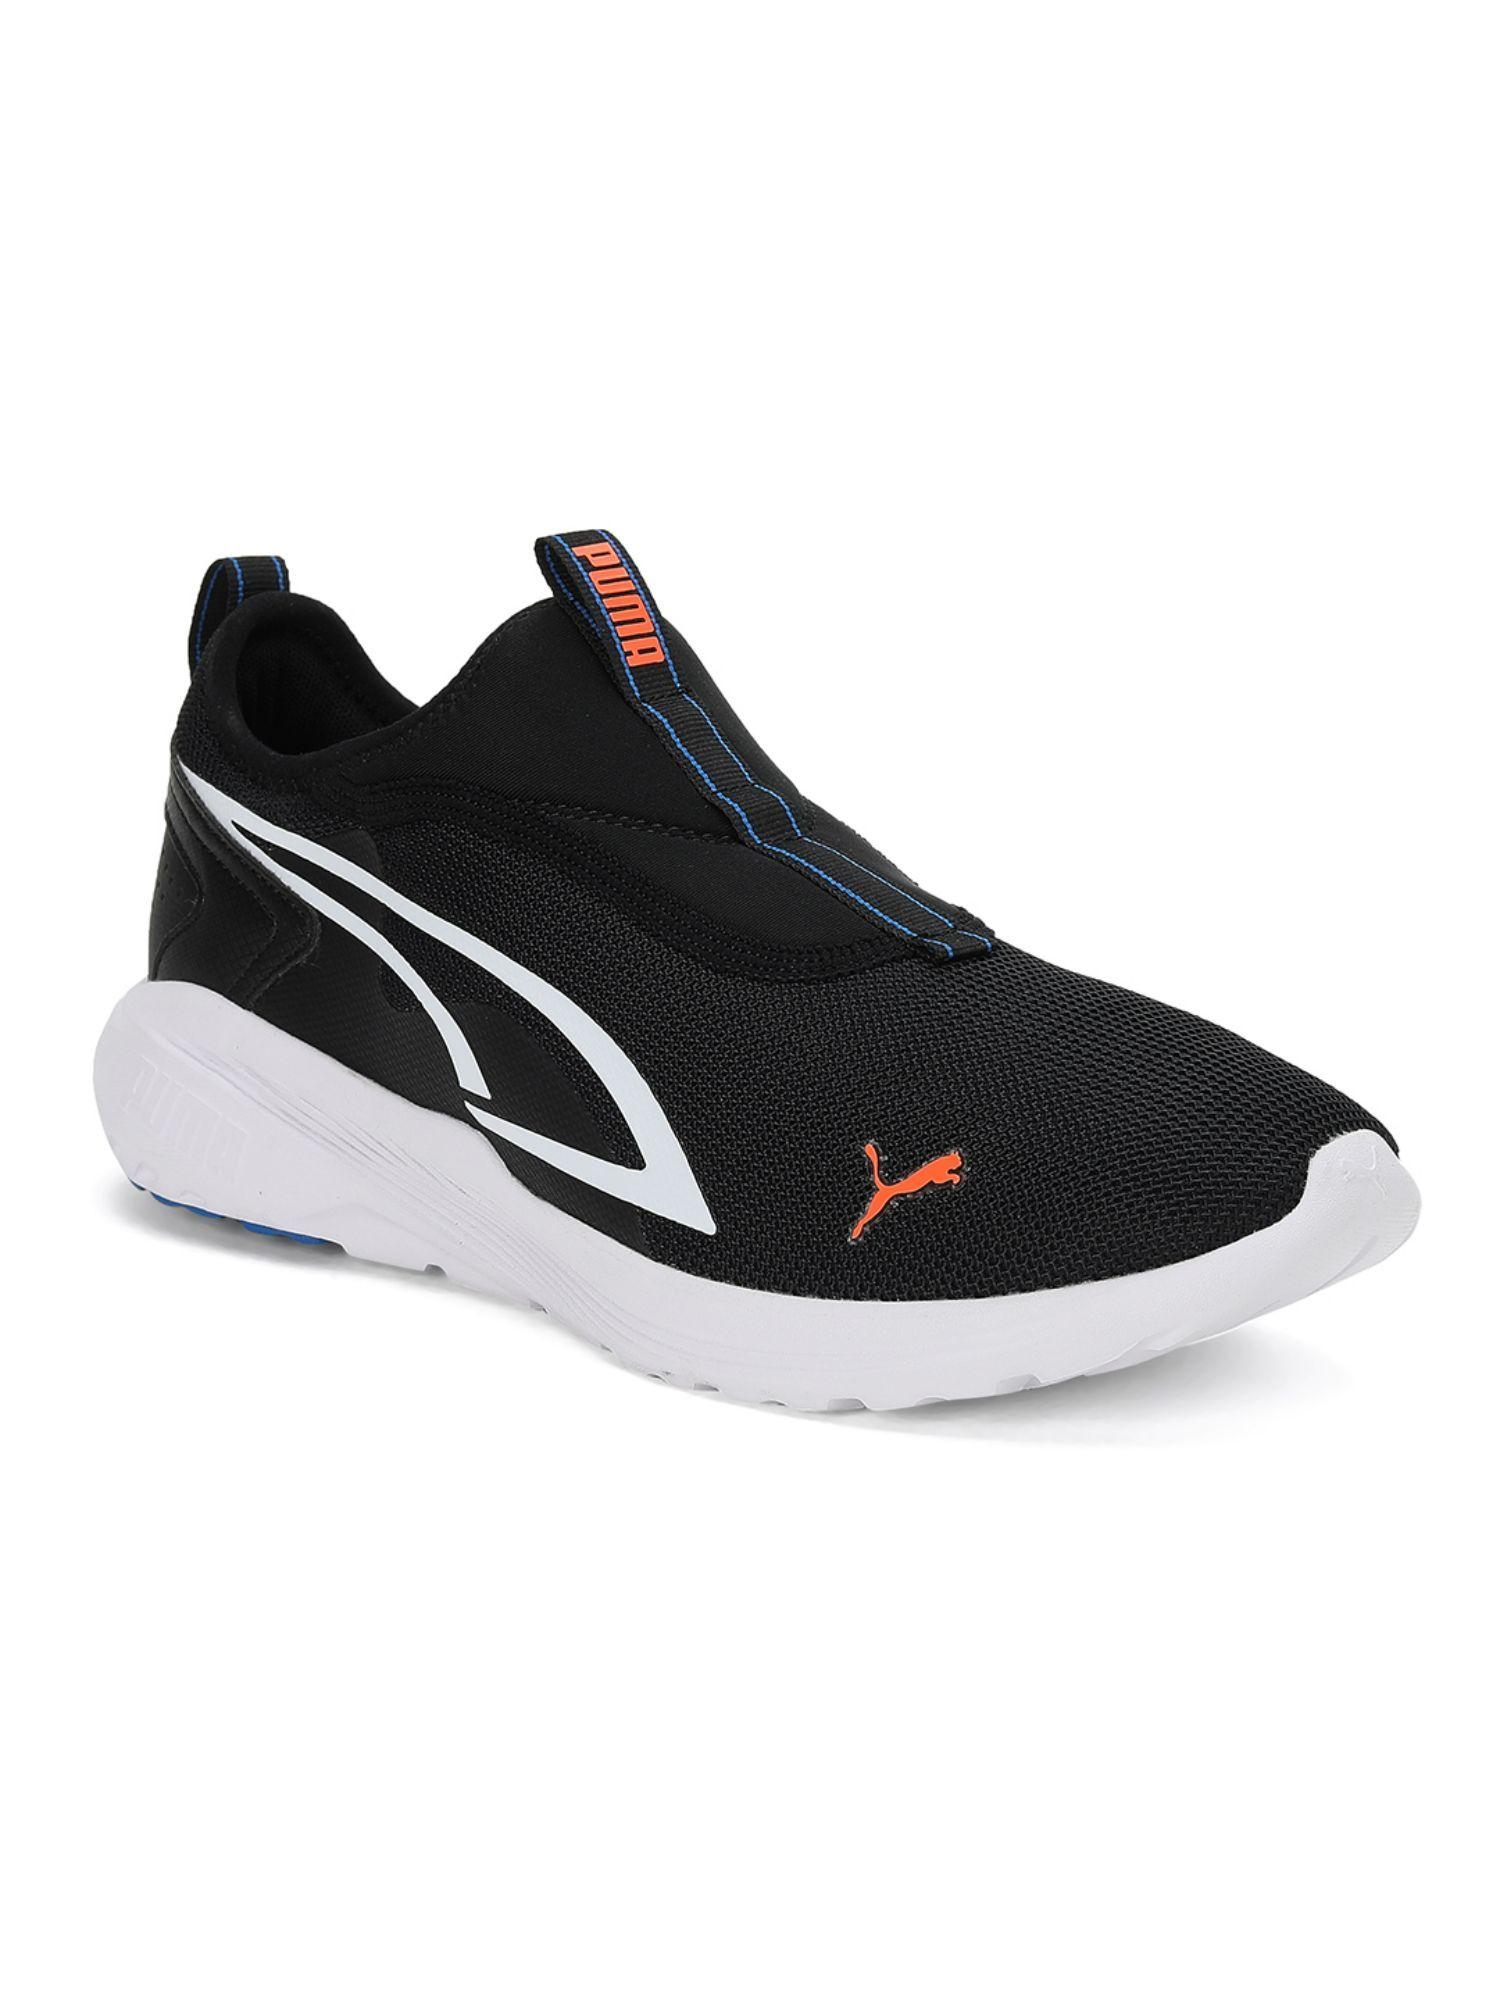 all-day-active-slipon-unisex-black-casual-shoes